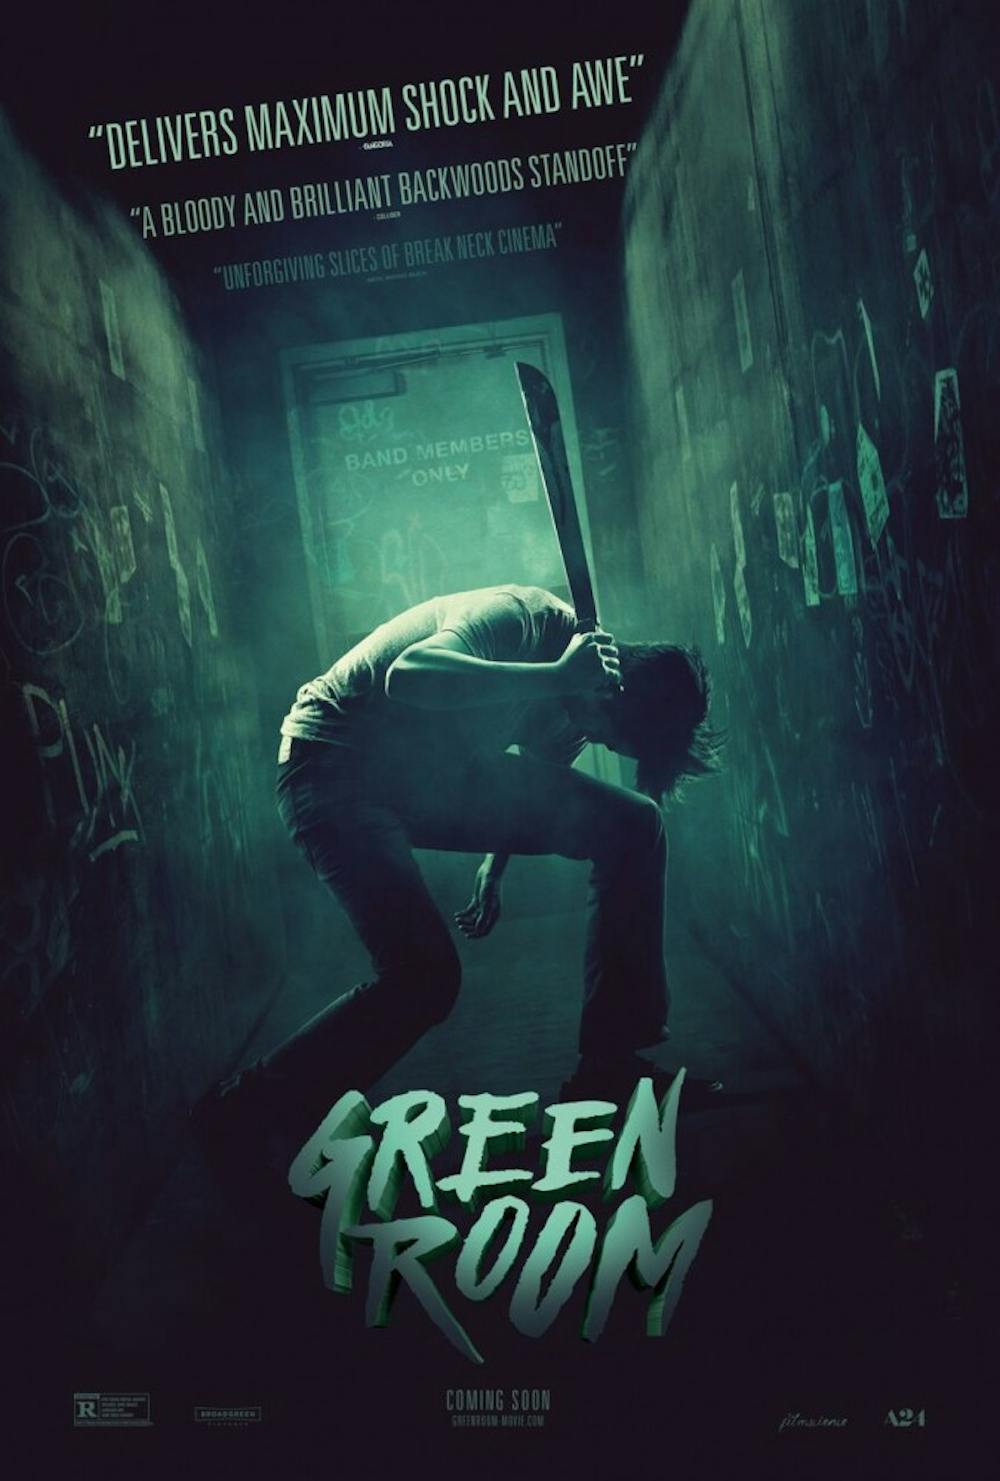 <p>"Green Room" is a high-spirited horror-thriller that follows a group of young punk rockers as they fight various antagonists such as neo-Nazis and flesh-eating dogs.</p>